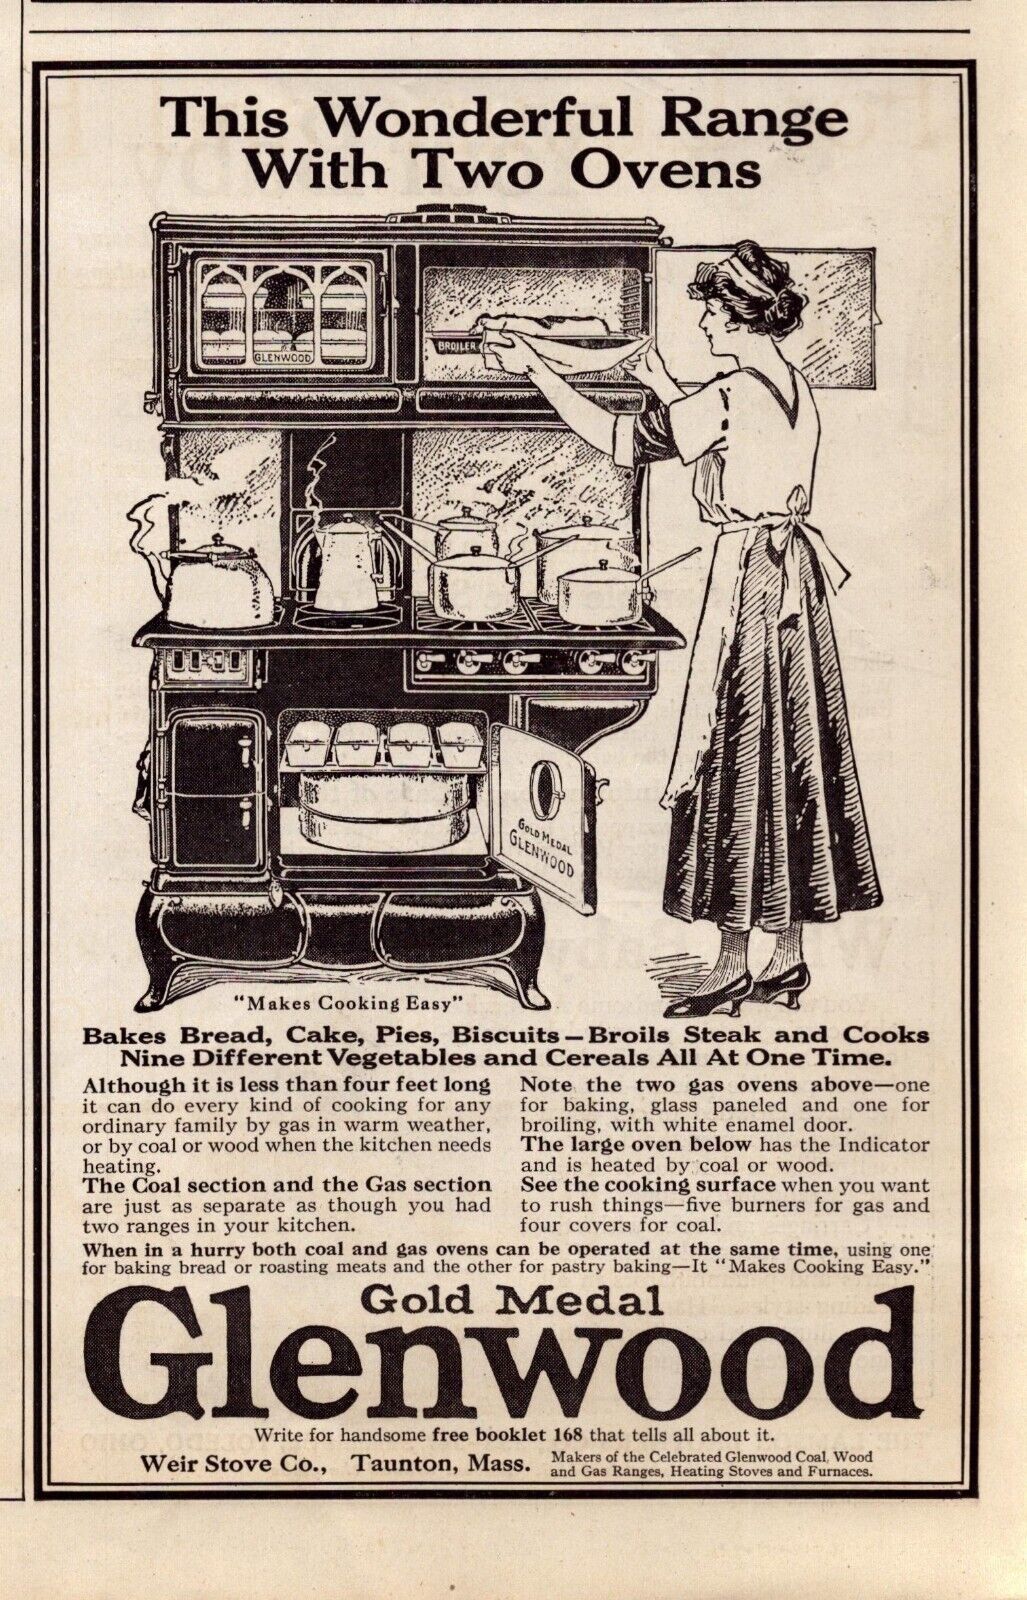 1920 Glenwood Gold Medal Range Print Ad With Two Ovens Housewife Baking